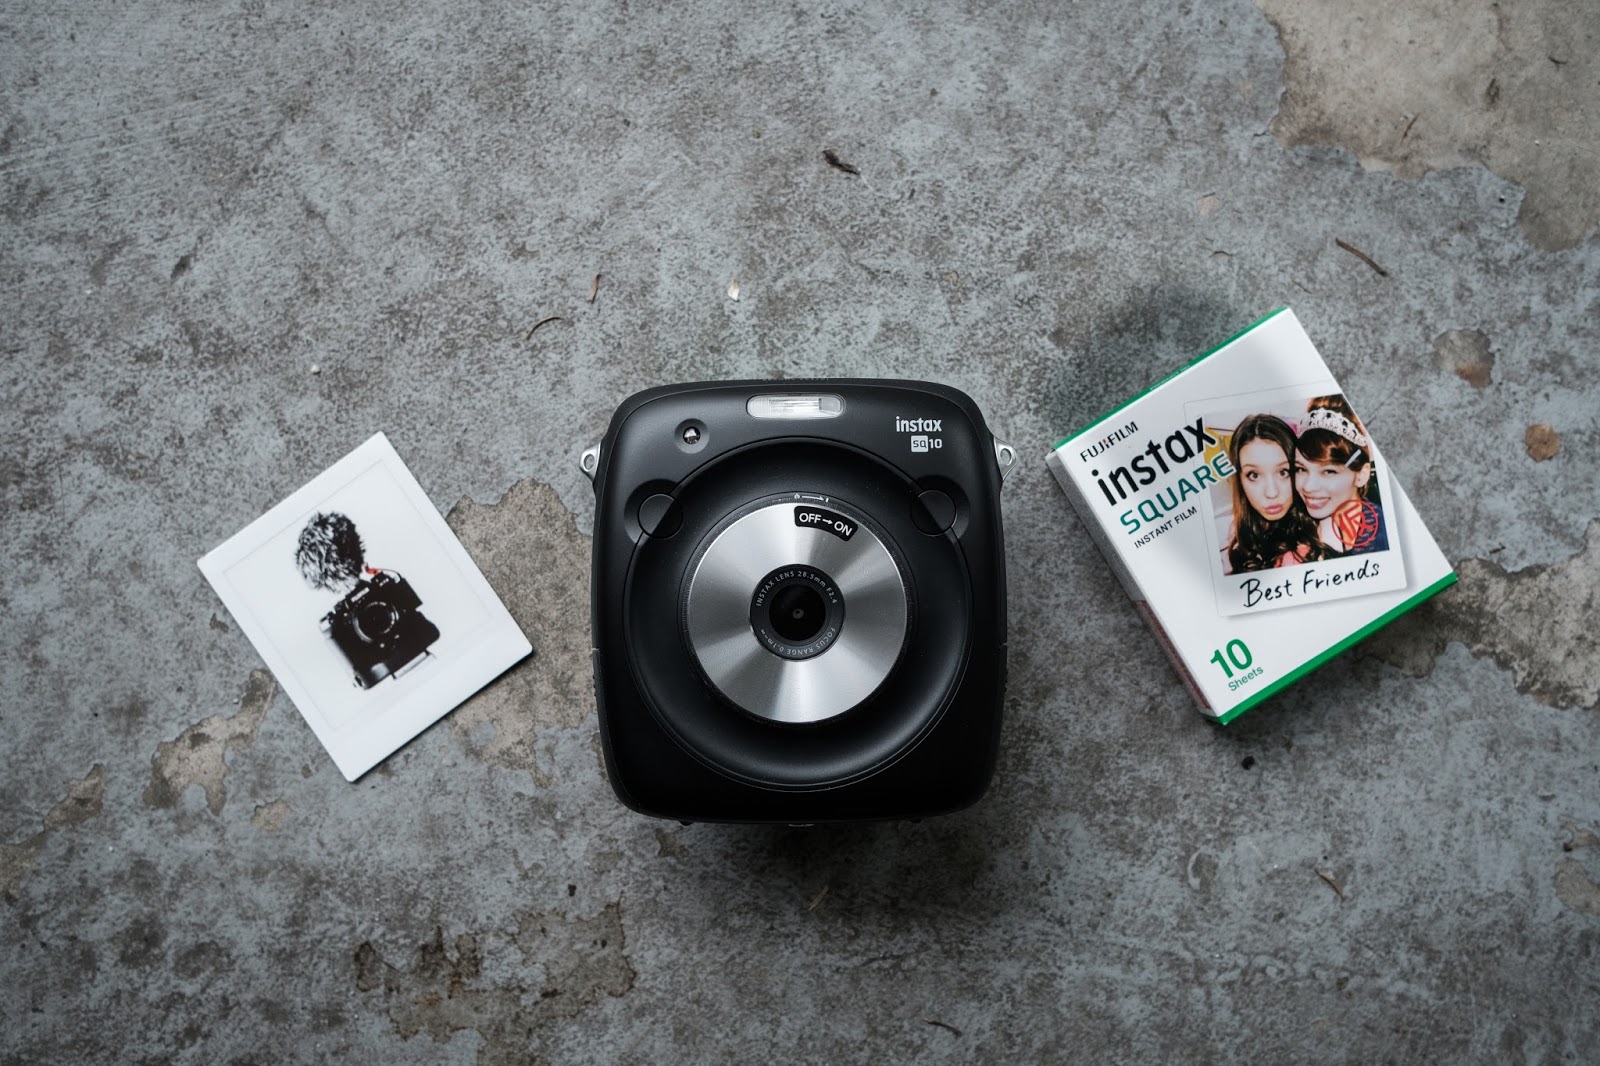 The Fujifilm Instax Square SQ10 is less fun than it should be